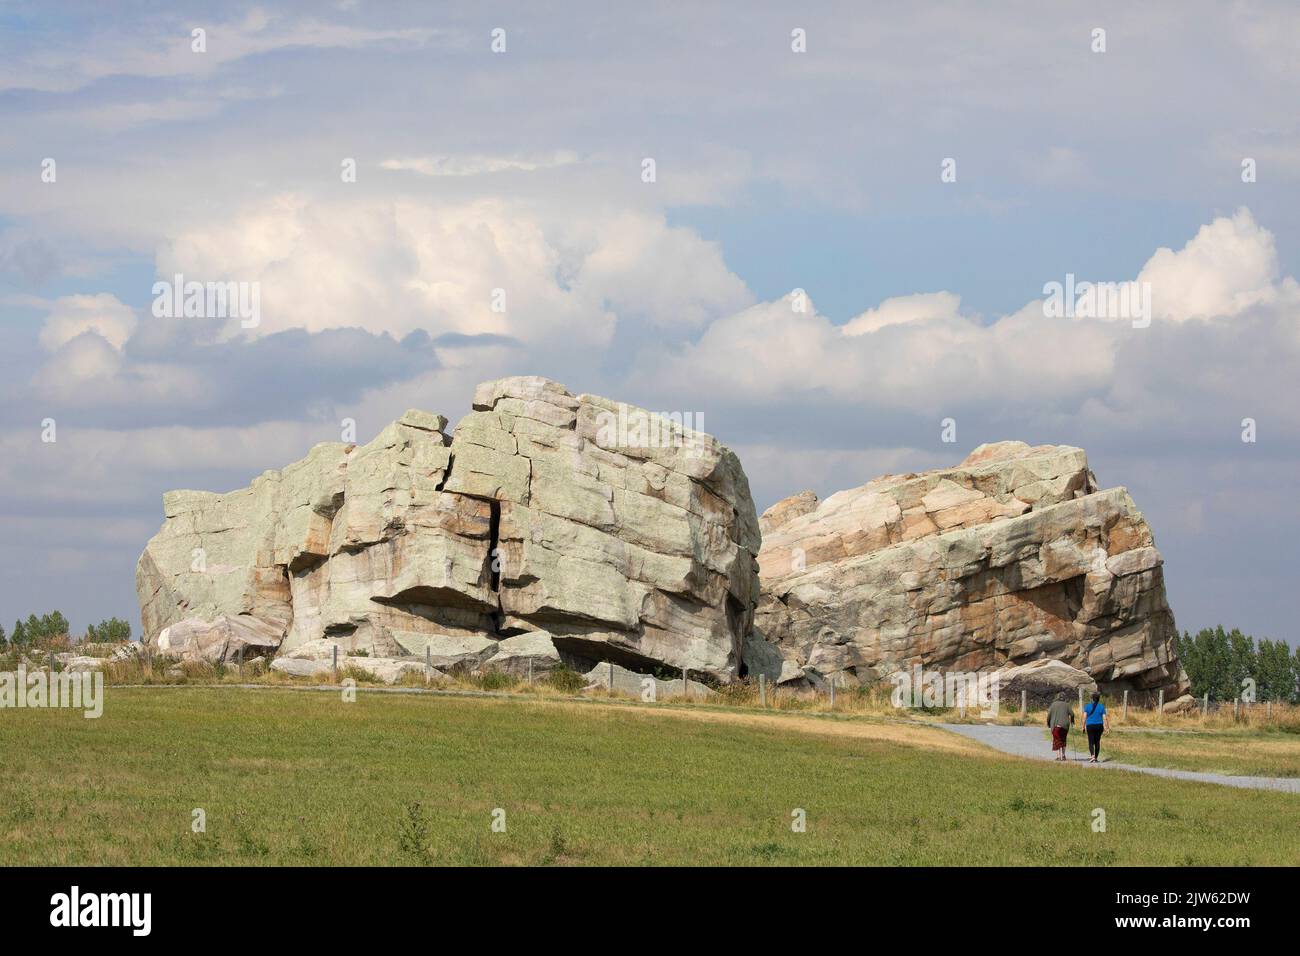 Okotoks Big Rock, the largest glacial erratic carried in glacier ice from Mount Edith Cavell, Rocky Mountains to the prairies during the Pleistocene Stock Photo